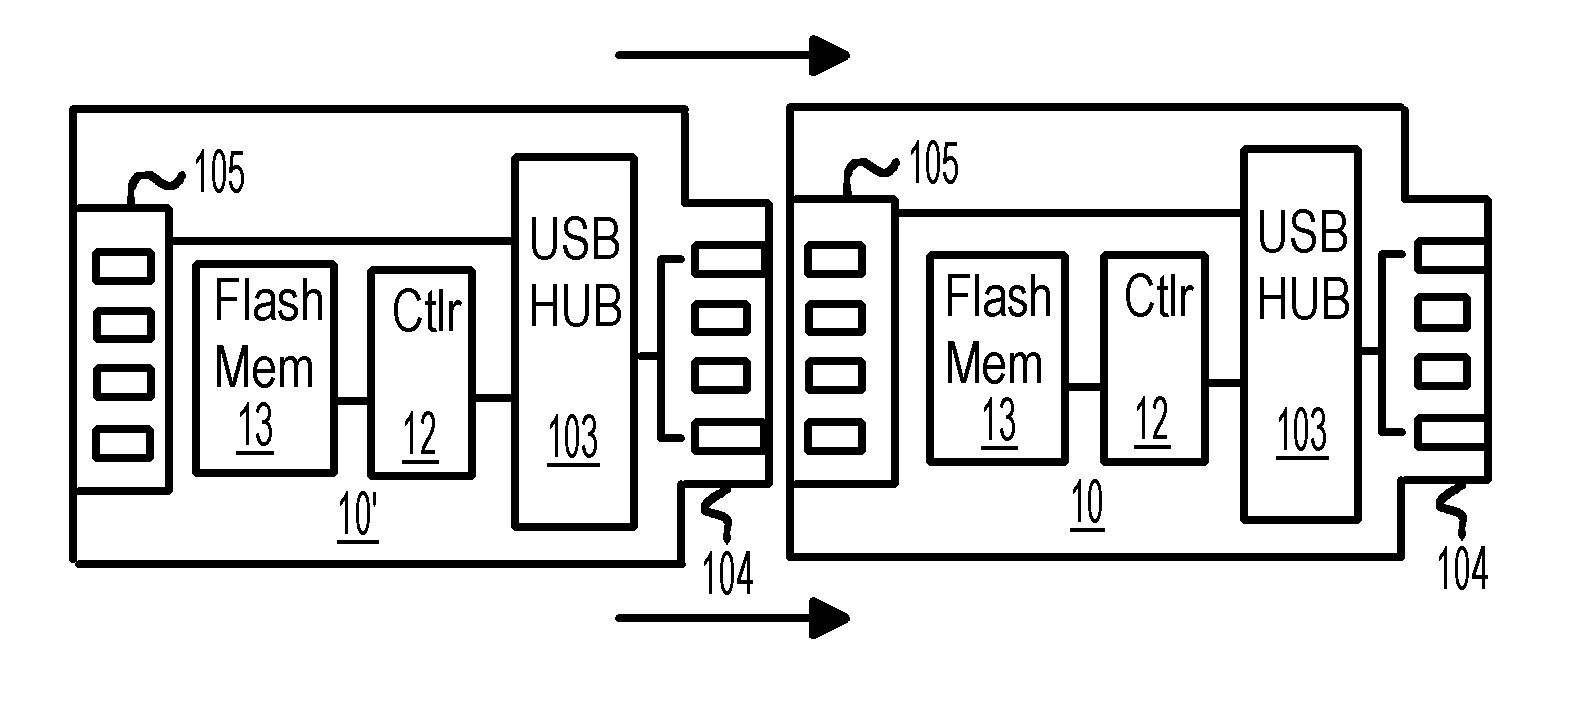 Capacity Expansion of Flash Memory Device with a Daisy-Chainable Structure and an Integrated Hub